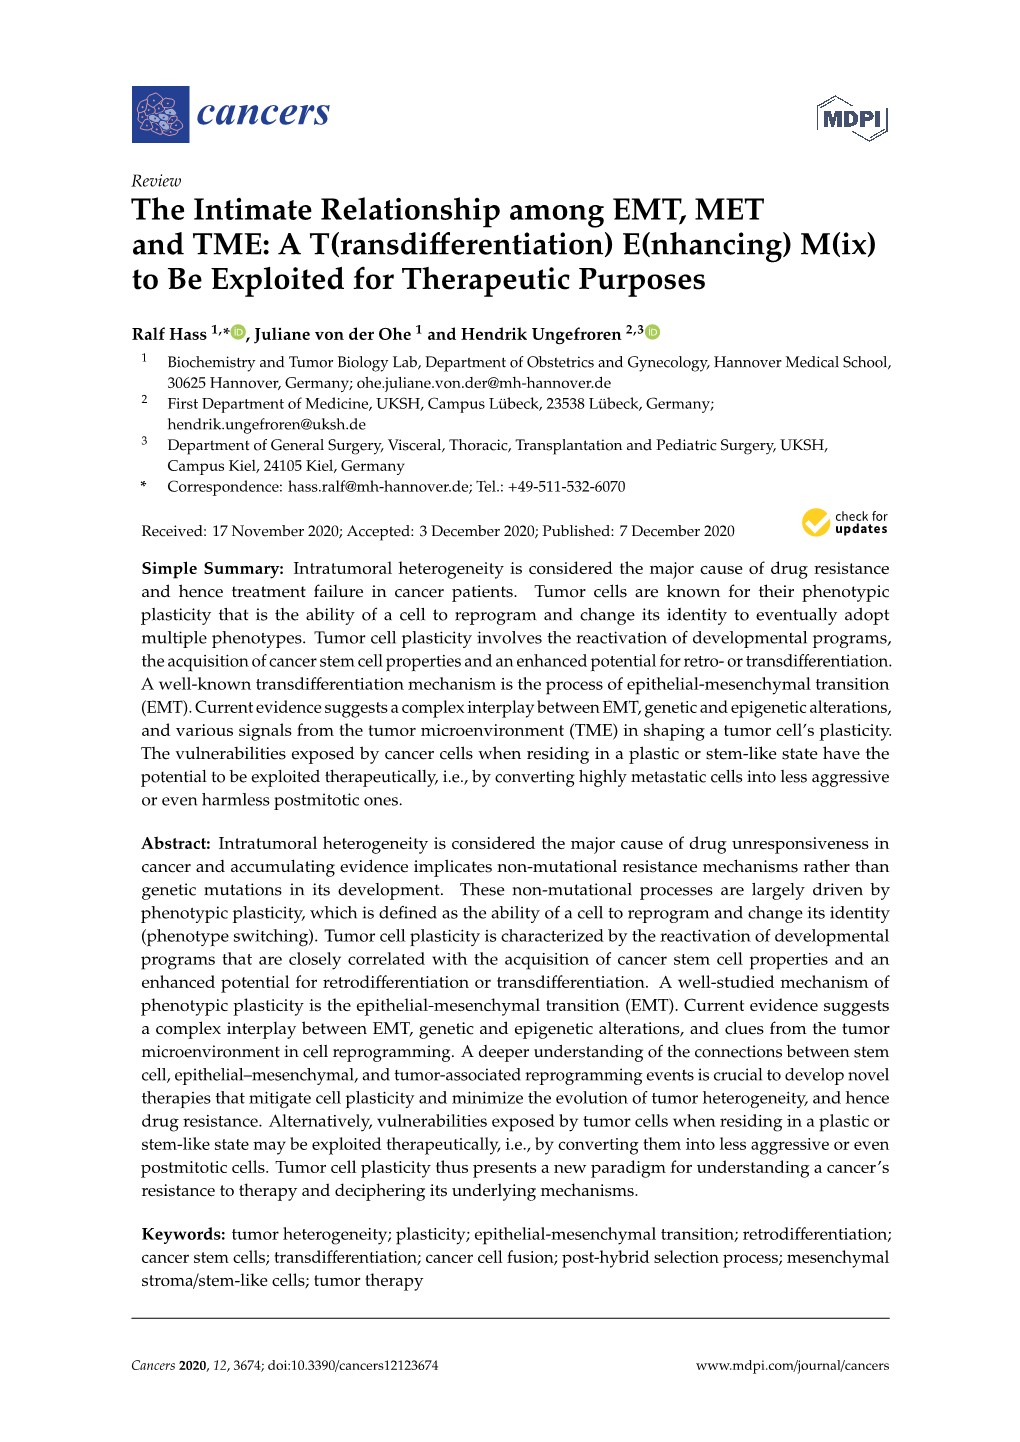 The Intimate Relationship Among EMT, MET and TME: a T(Ransdiﬀerentiation) E(Nhancing) M(Ix) to Be Exploited for Therapeutic Purposes